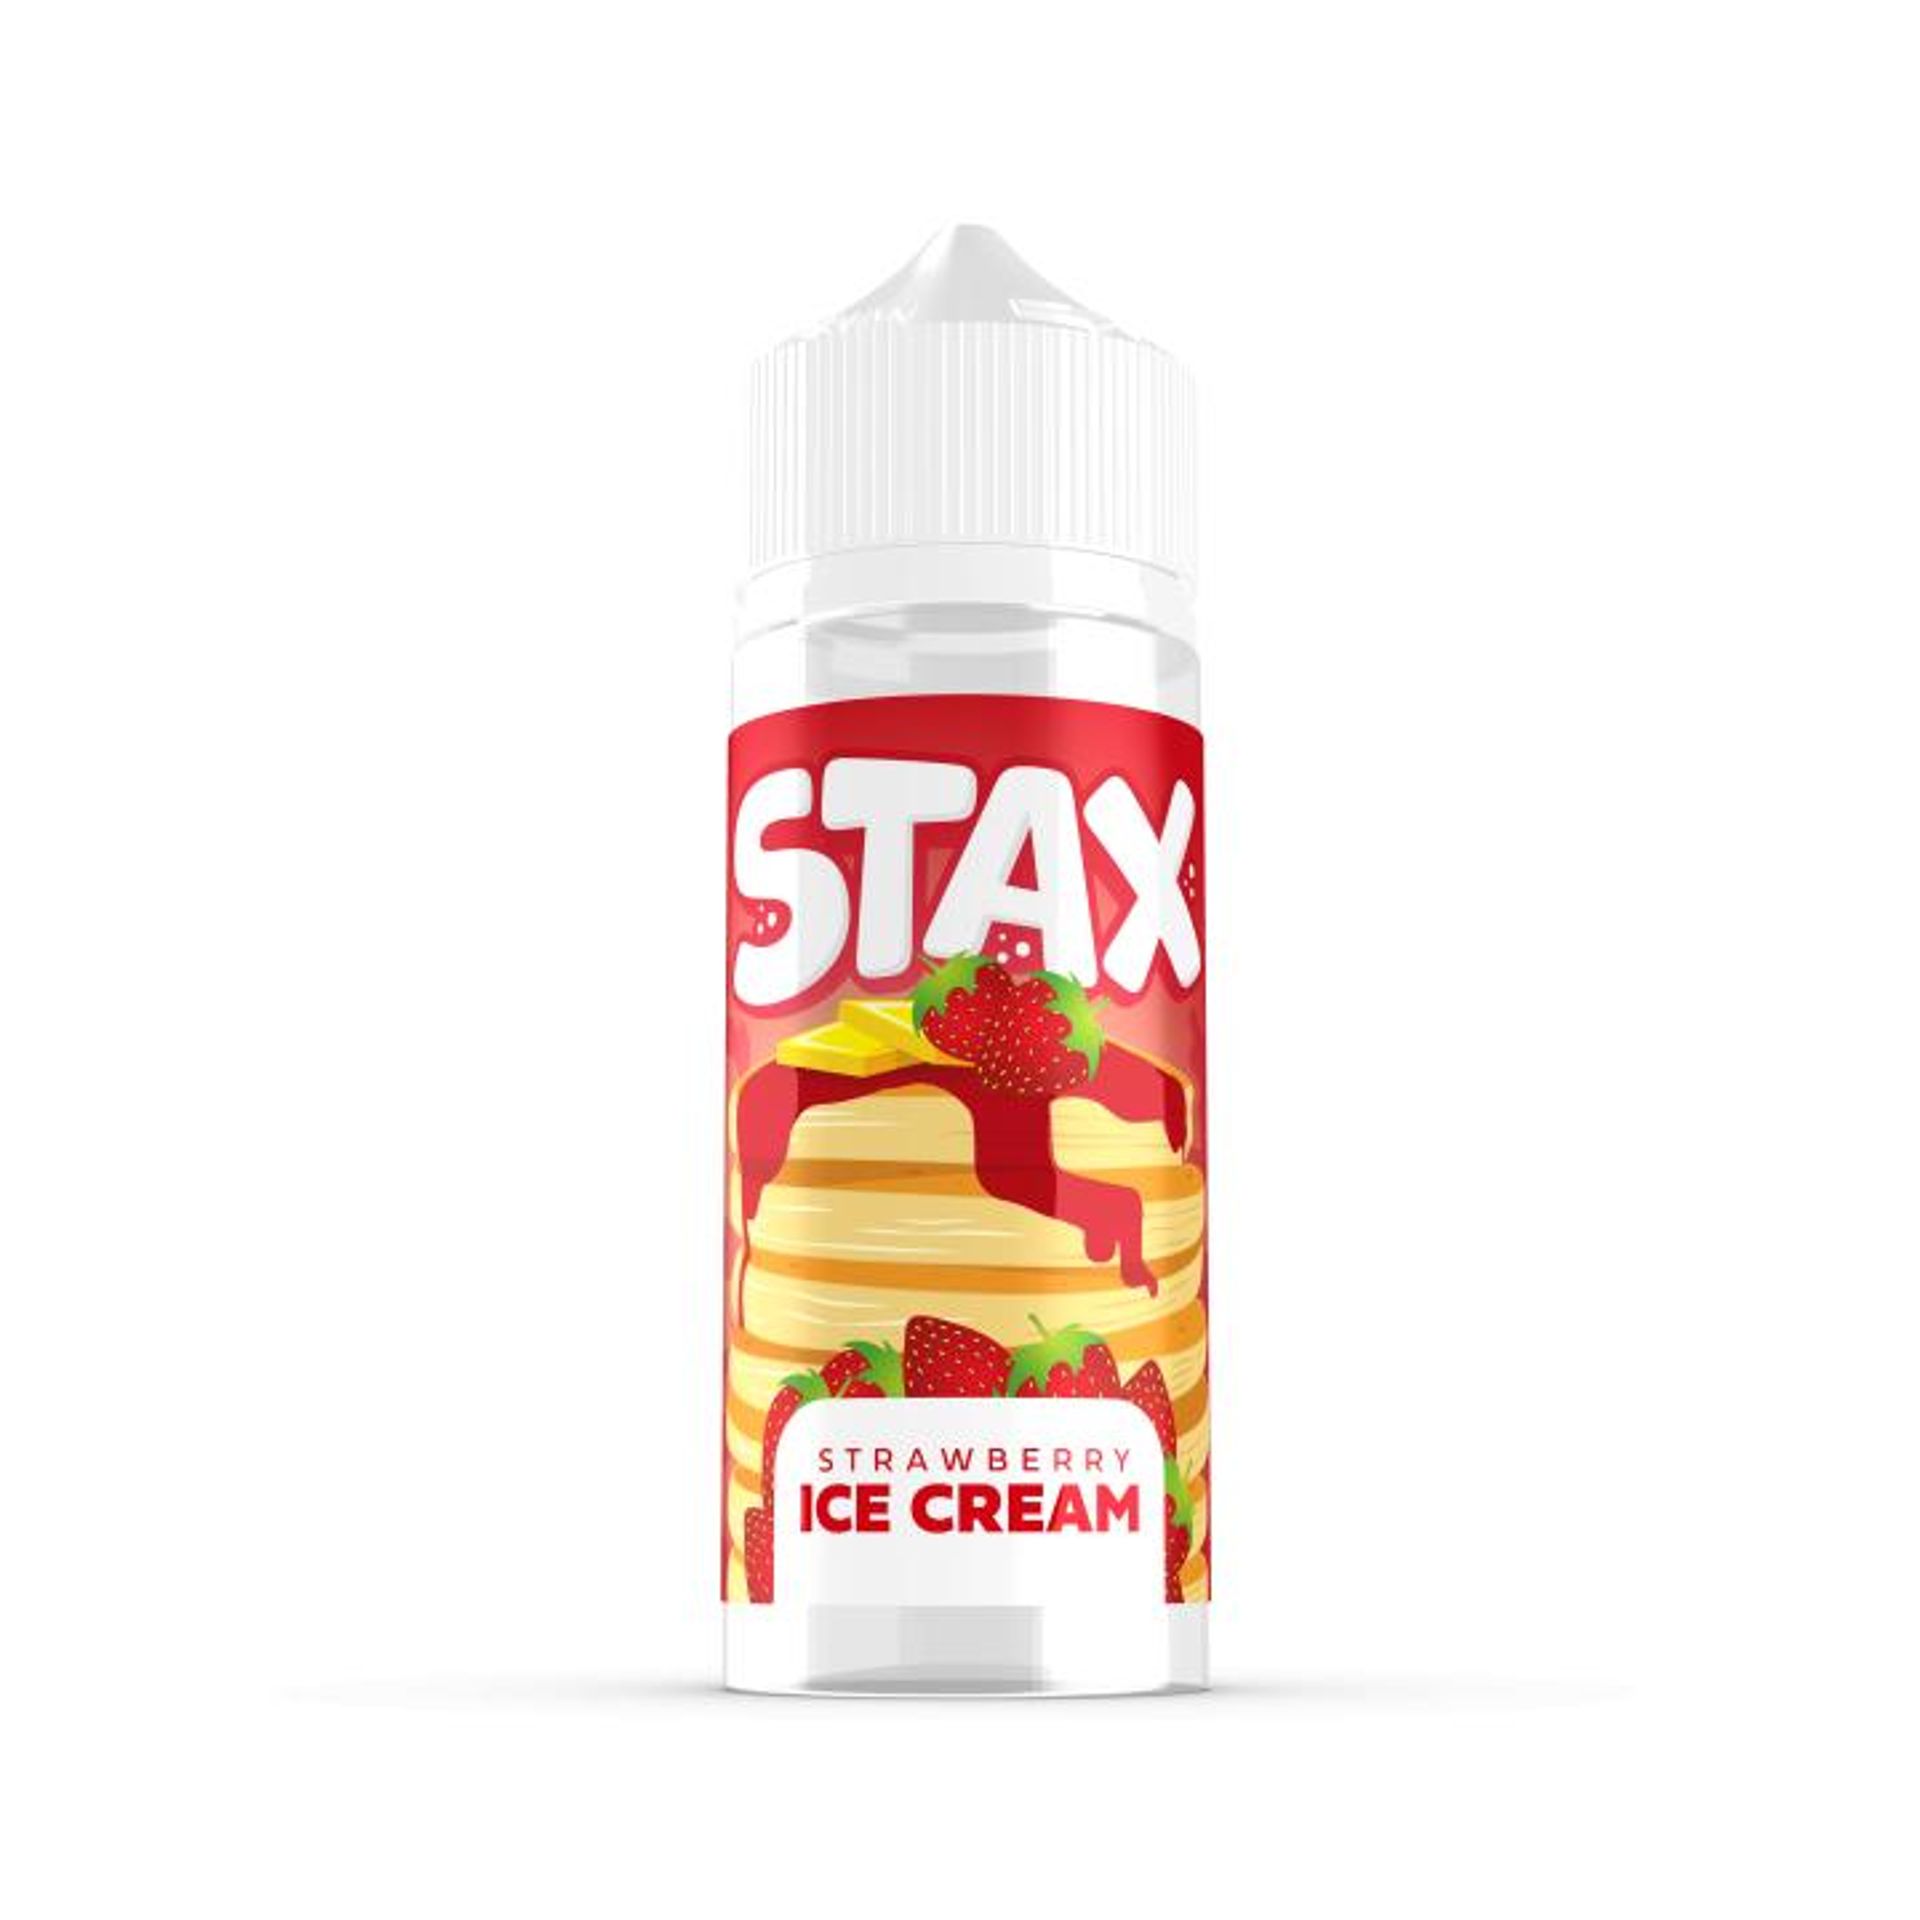 Image of Strawberry Ice Cream Pancakes by Stax